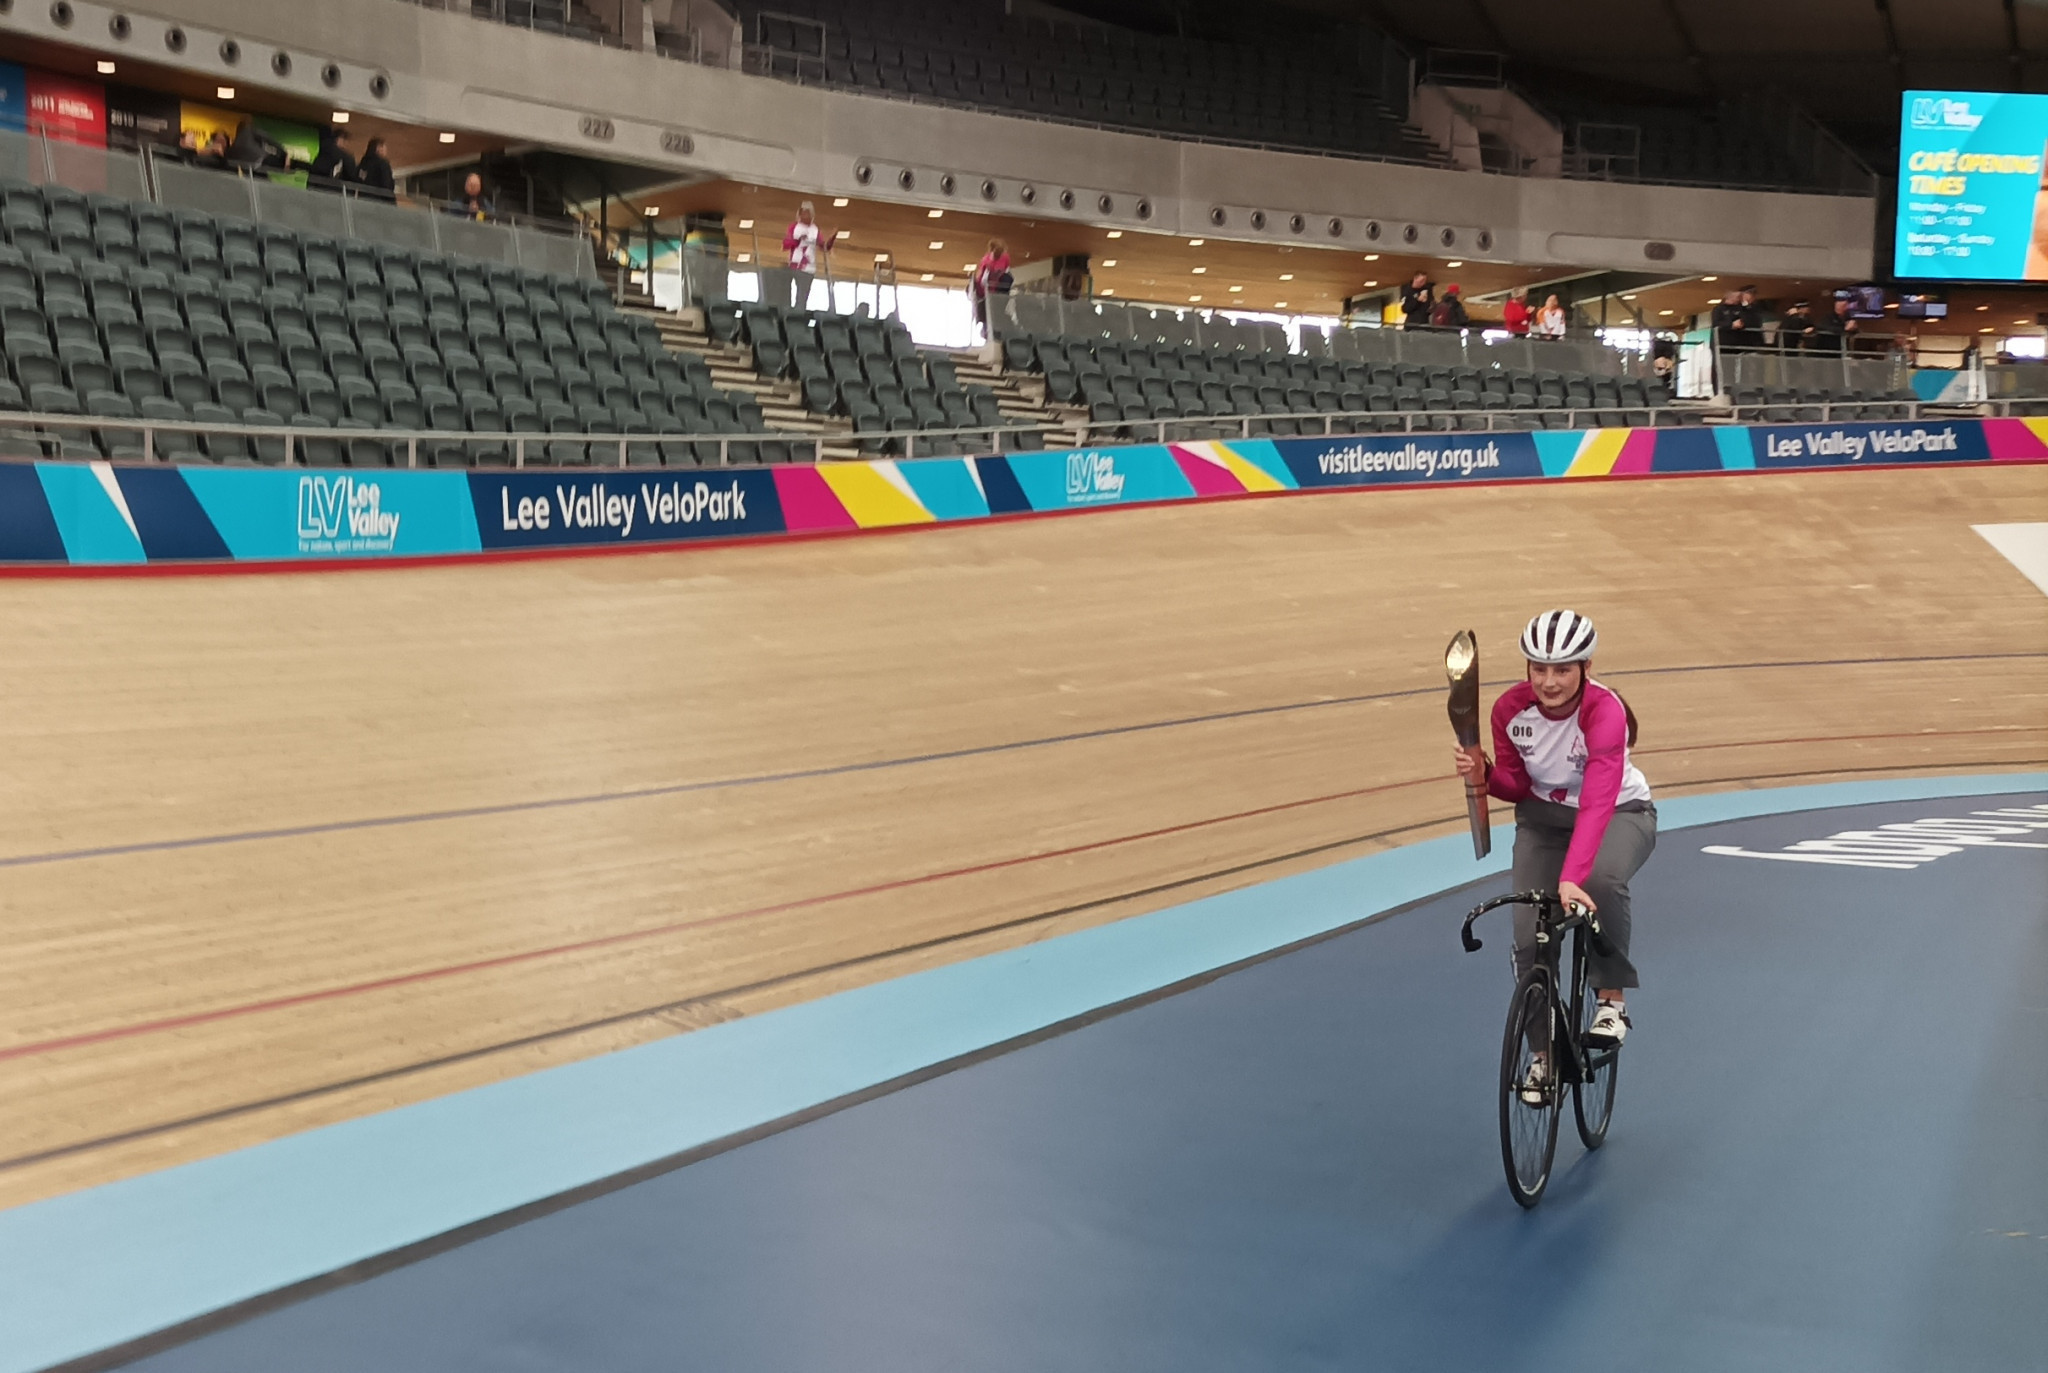 The Lee Valley VeloPark is set to host Birmingham 2022's track cycling events from July 29 to August 1 ©ITG